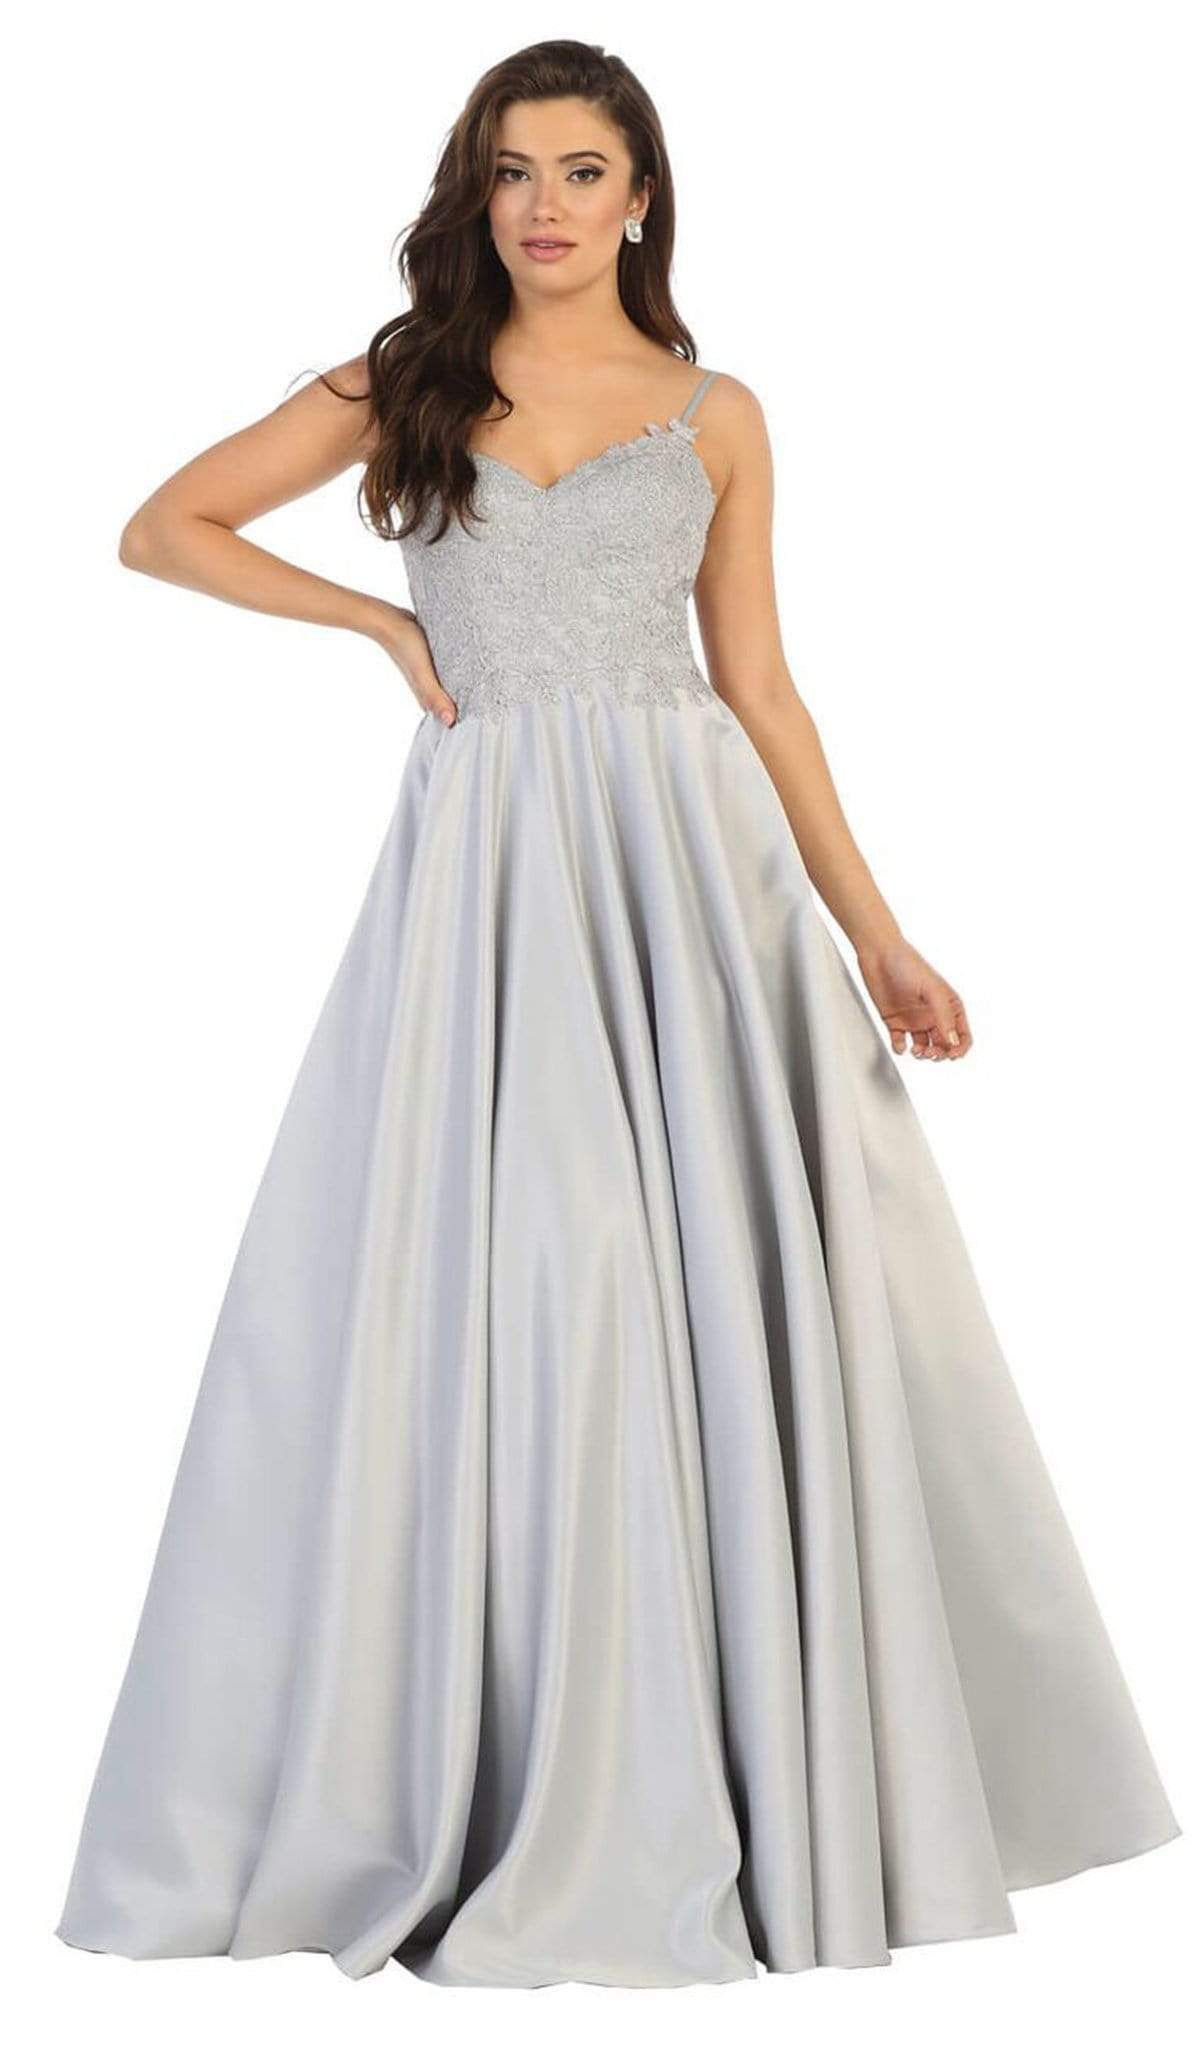 May Queen - MQ1685 Sleeveless Beaded Mesh Lace Back A-Line Satin Gown Bridesmaid Dresses 4 / Silver